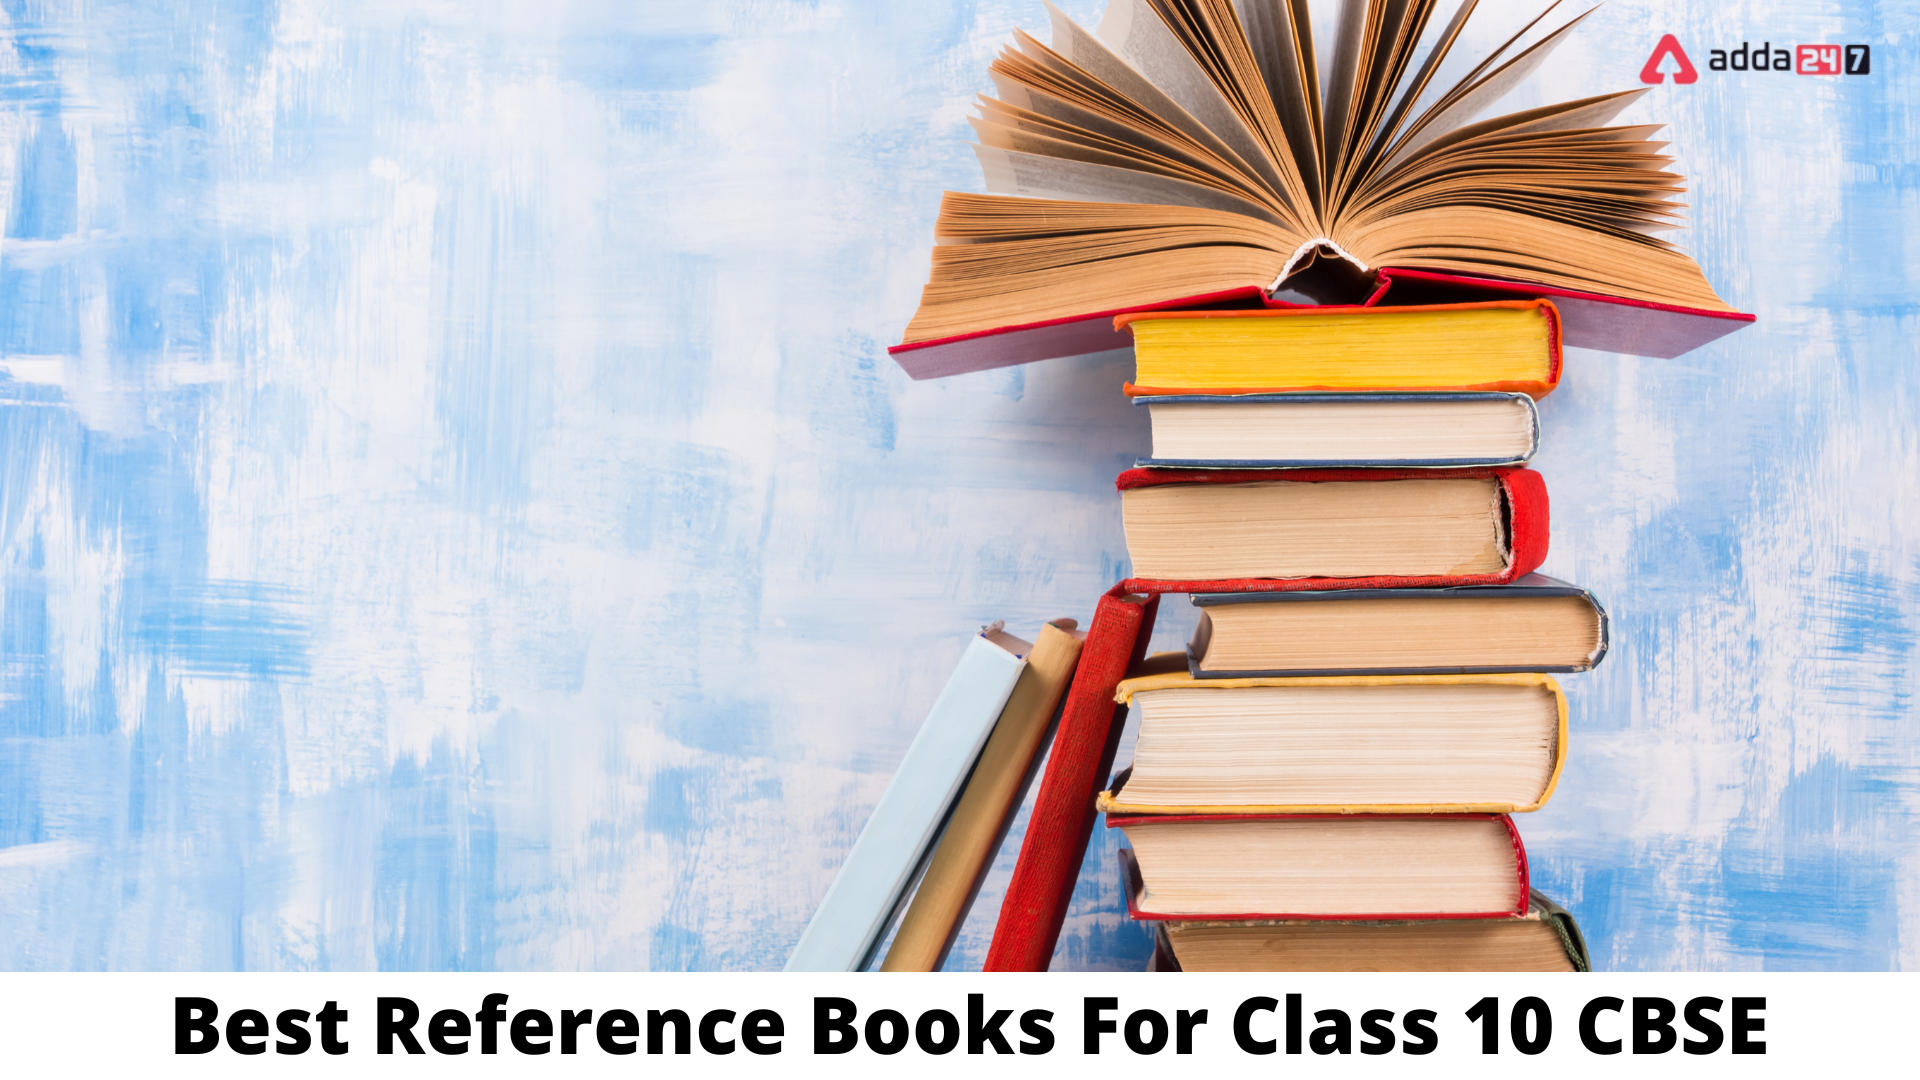 Best Reference Books for Class 10 CBSE